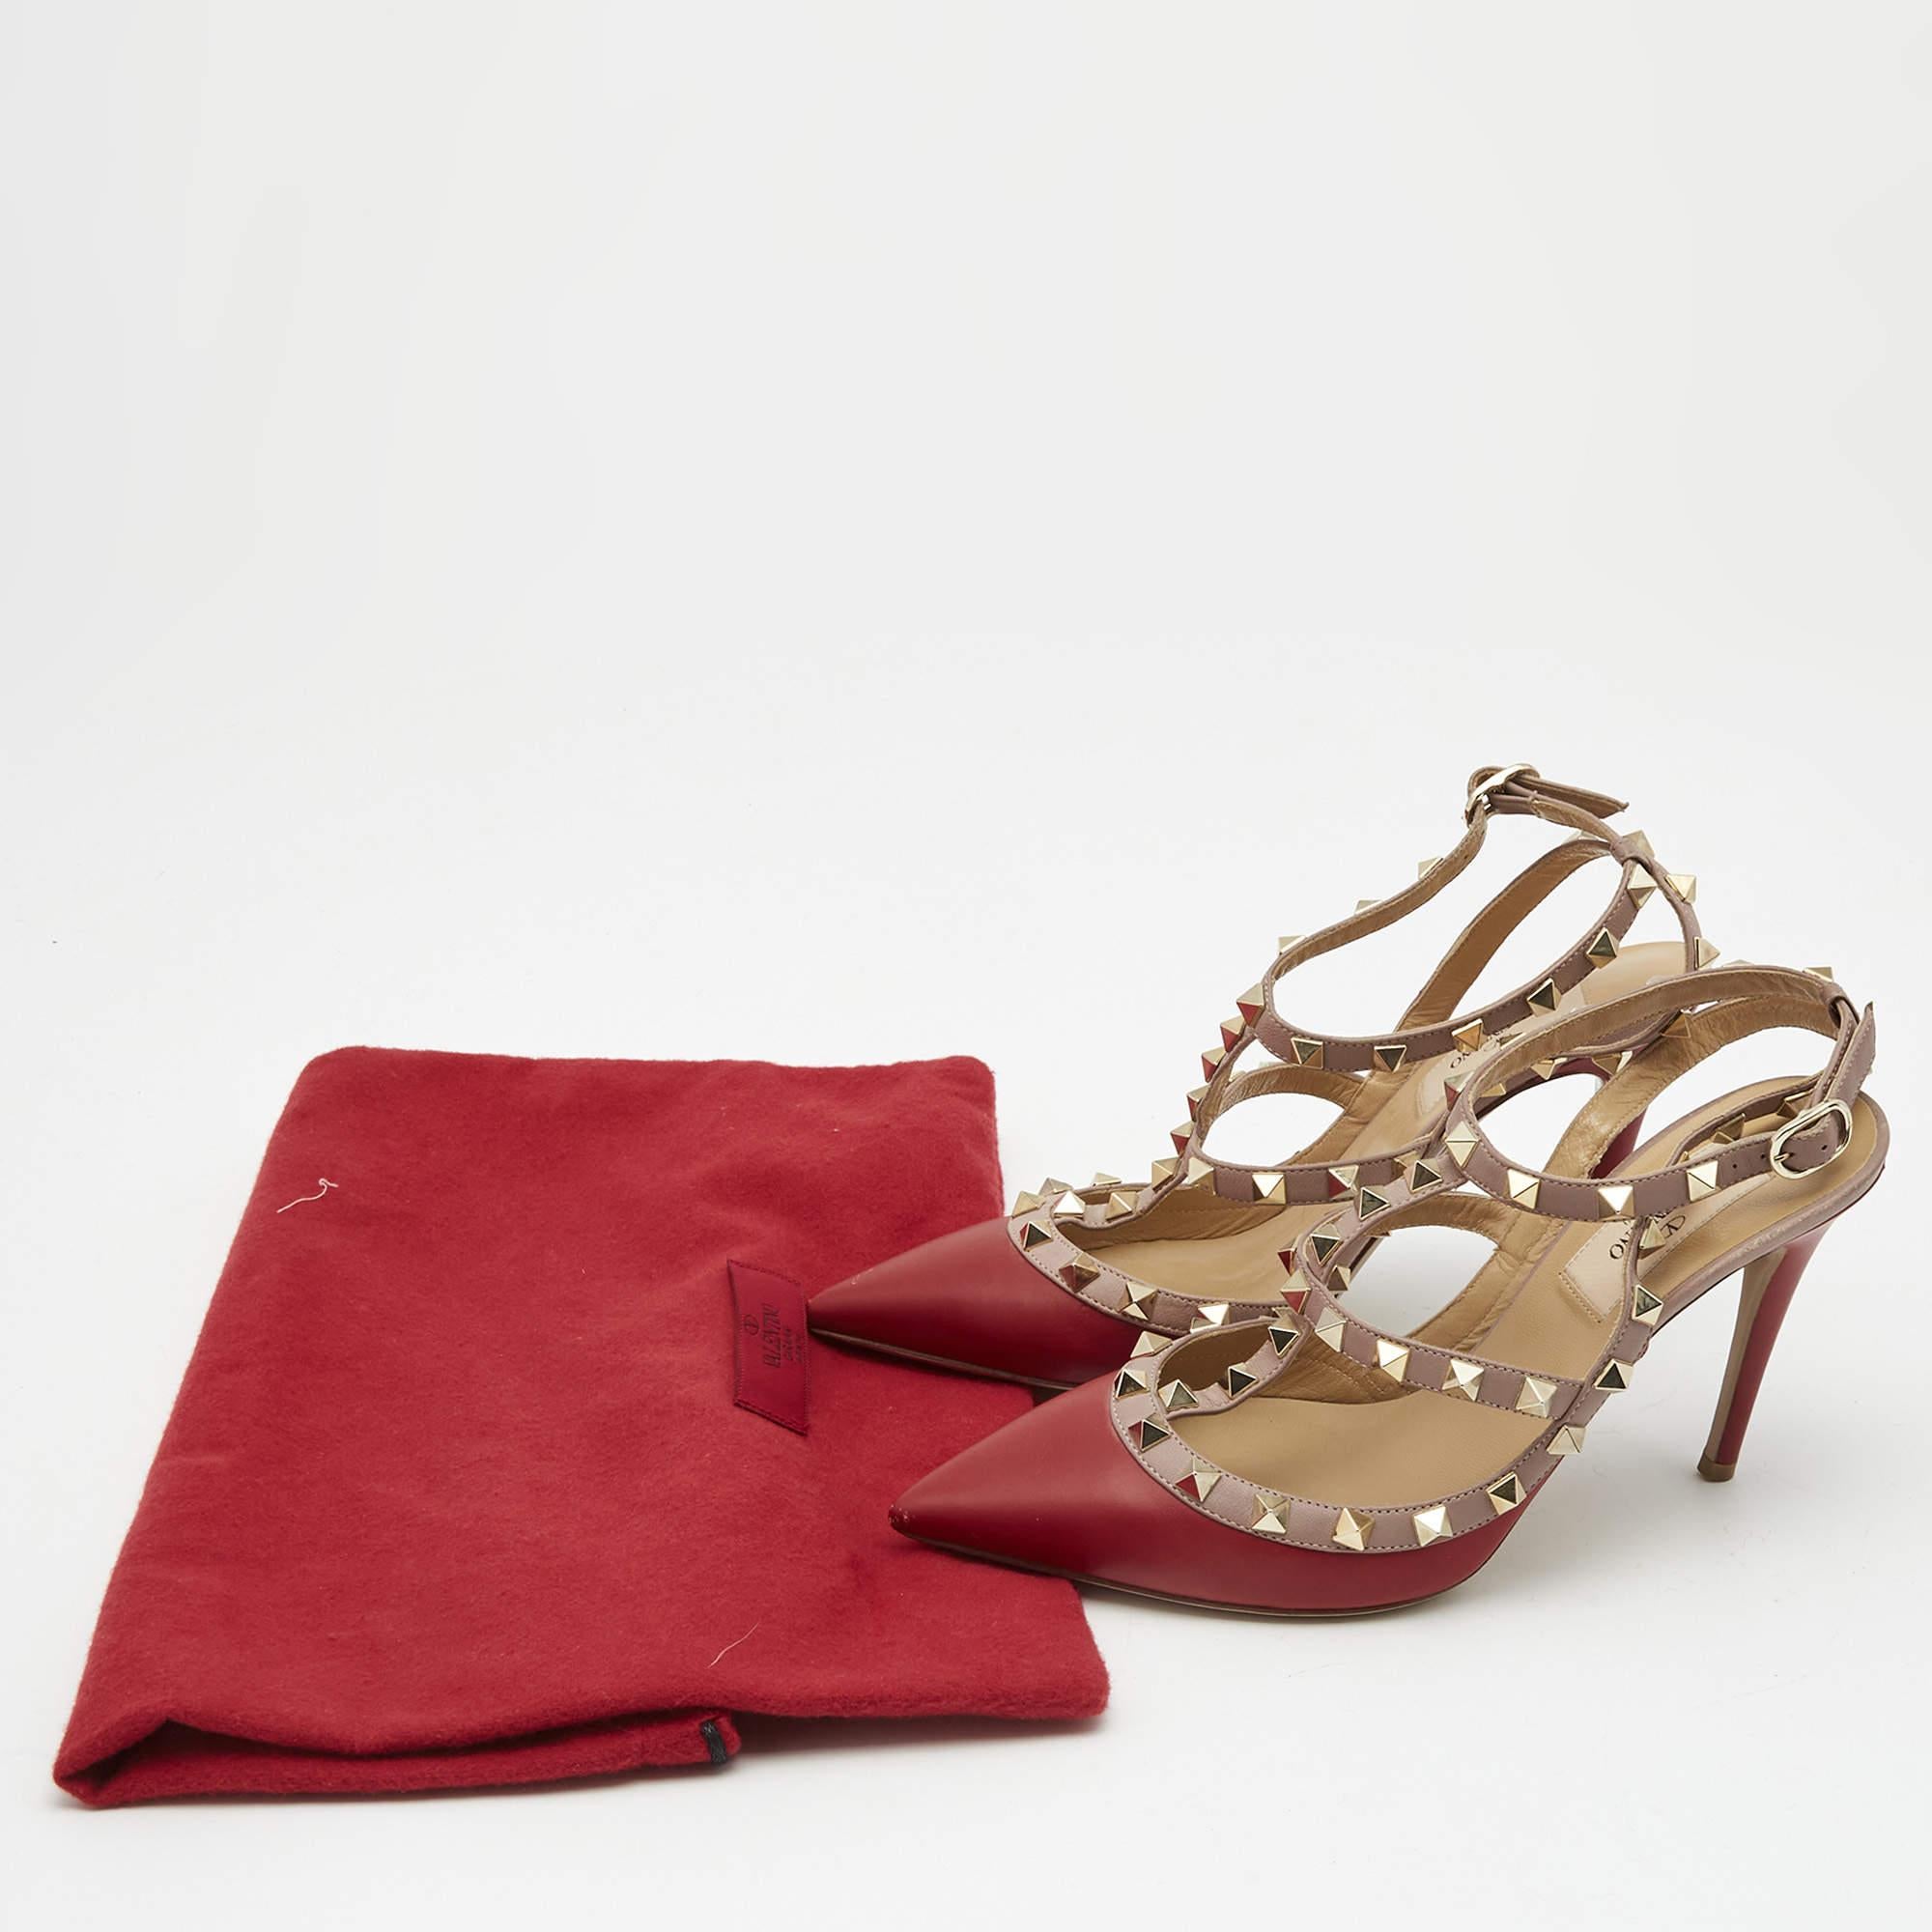 Valentino Red Leather Rockstud Ankle Strap Pumps Size 36.5 6